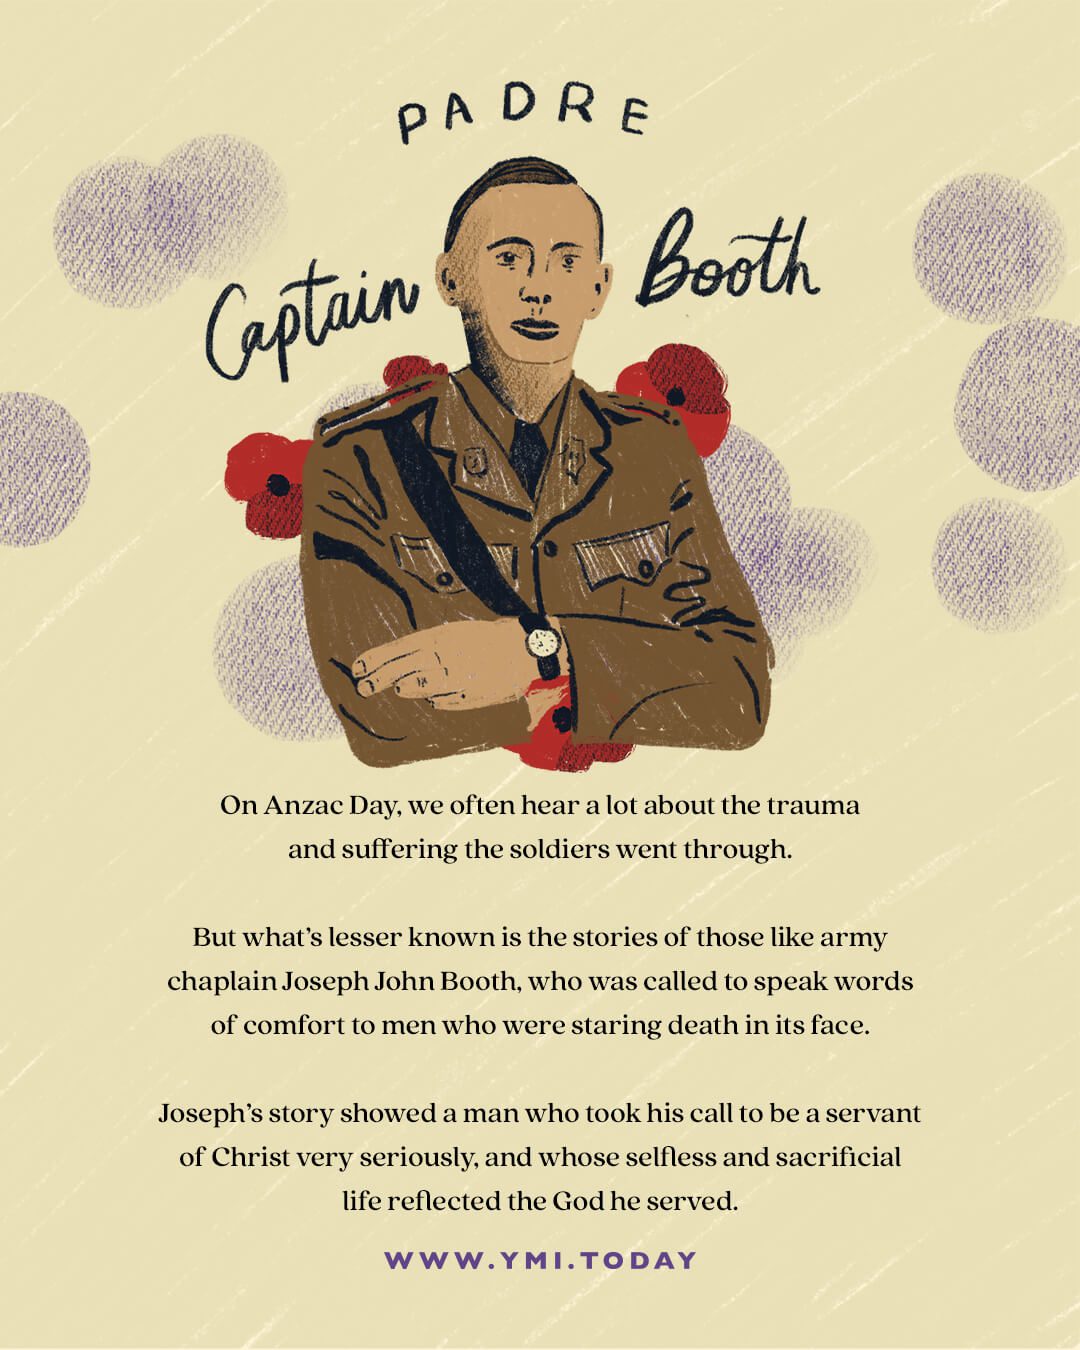 Illustration of Padre Captain Booth